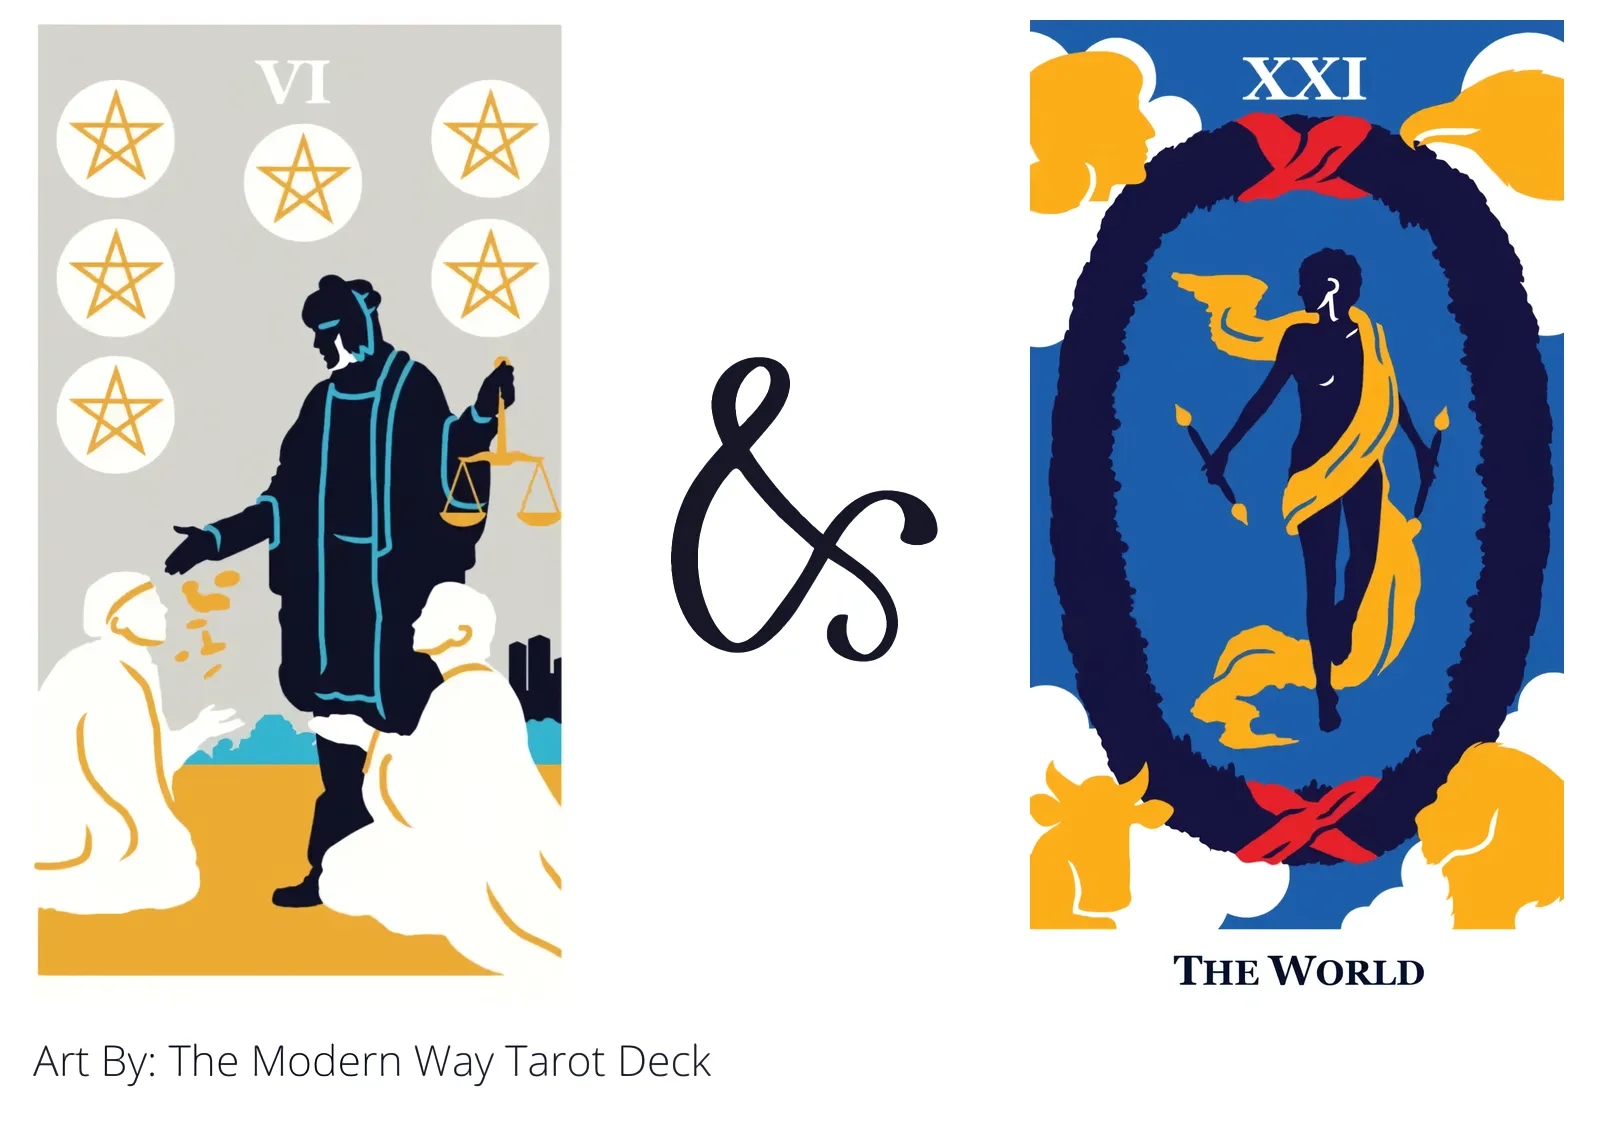 six of pentacles and the world tarot cards together